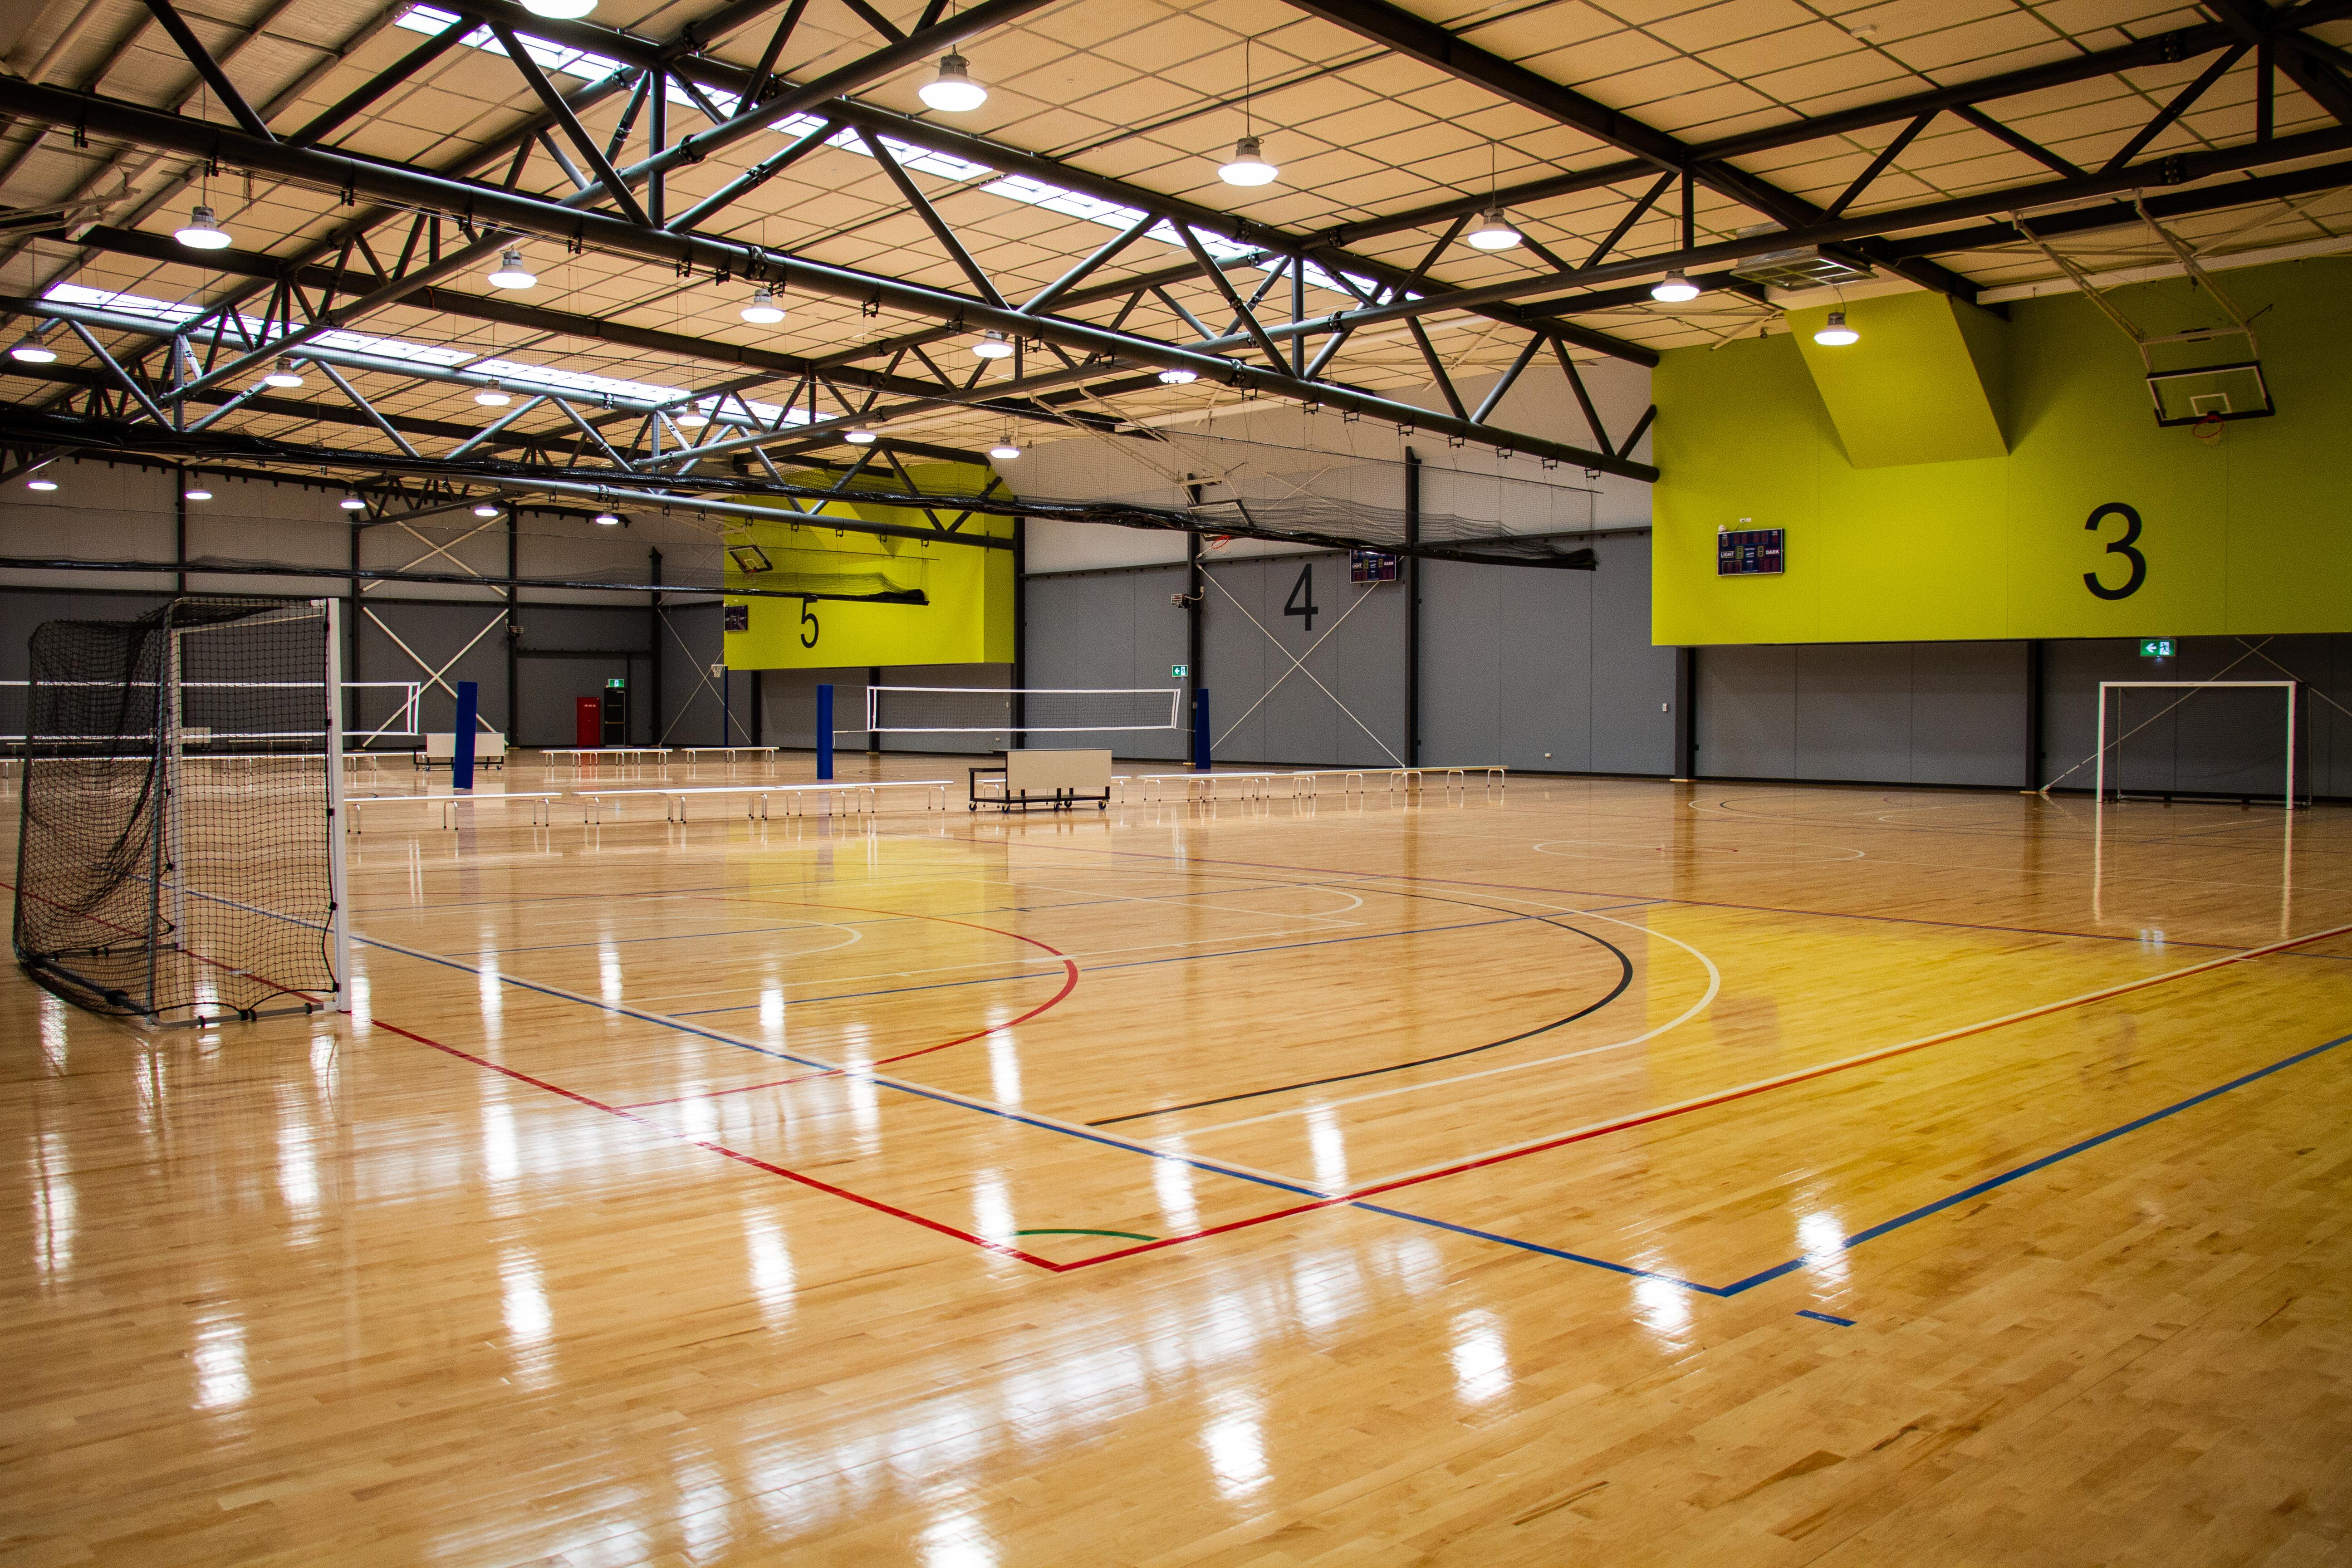 Large indoor multi-sports stadium with soccer goals on court and the numbers 3, 4 and 5 visible on the back wall.